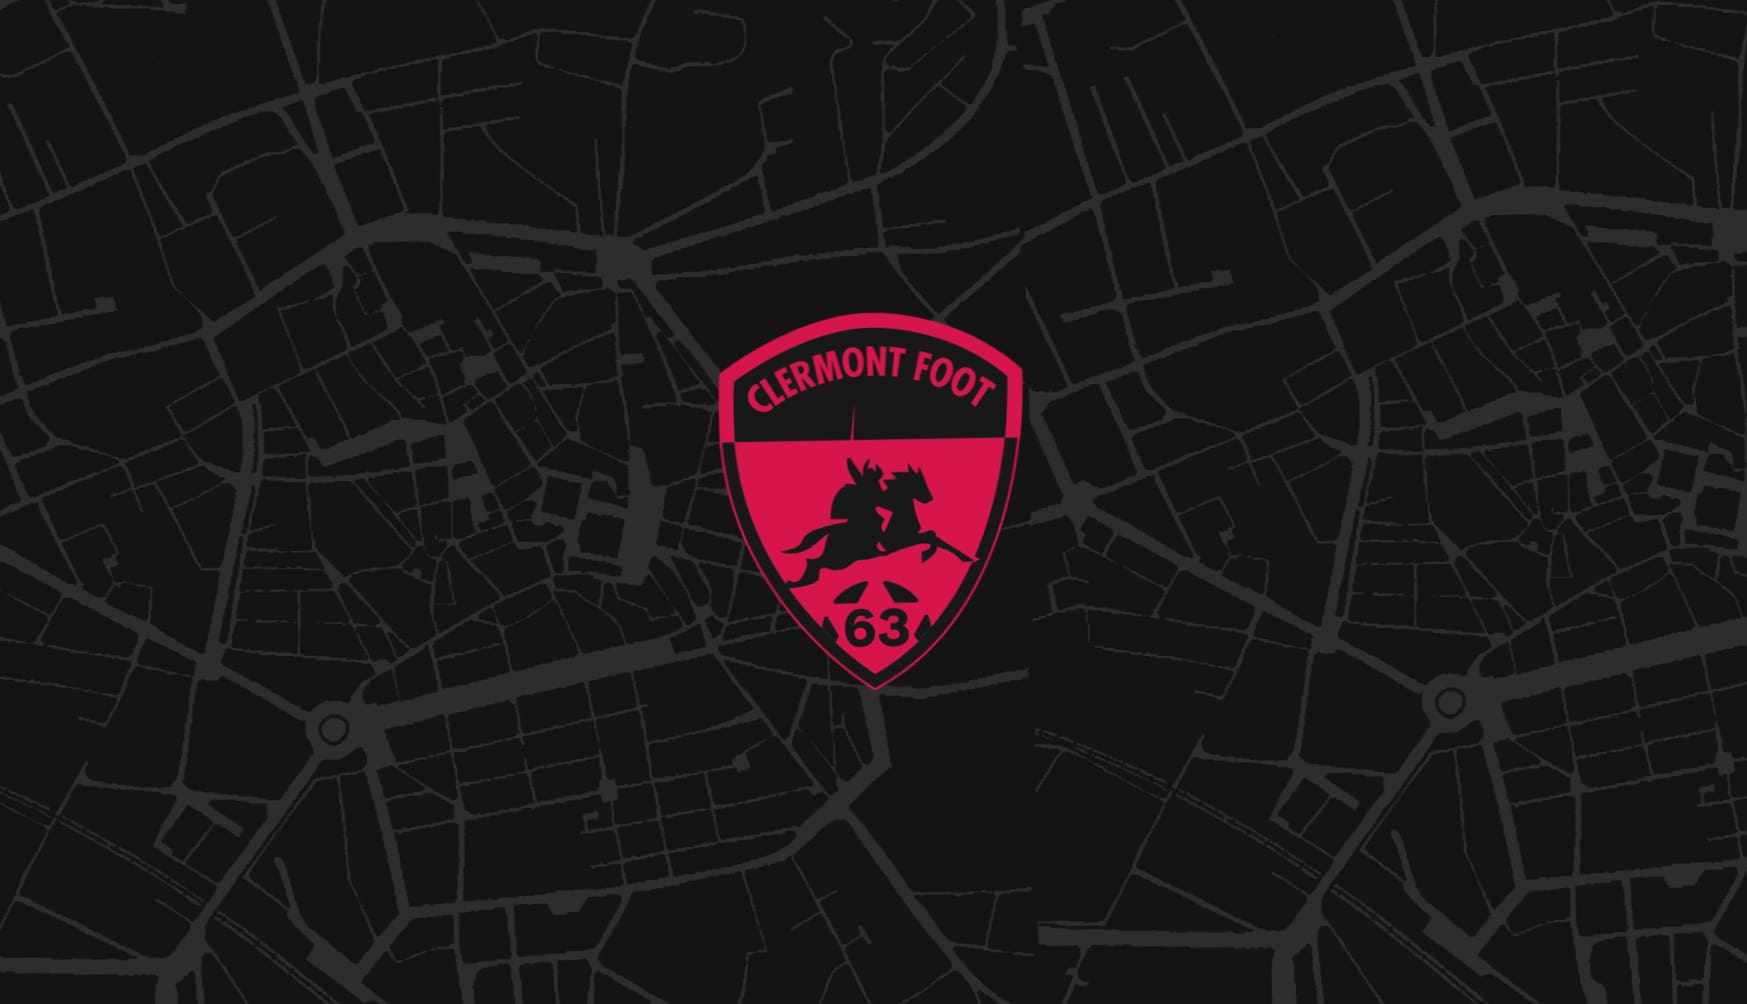 Clermont Foot 63 wallpapers HD quality